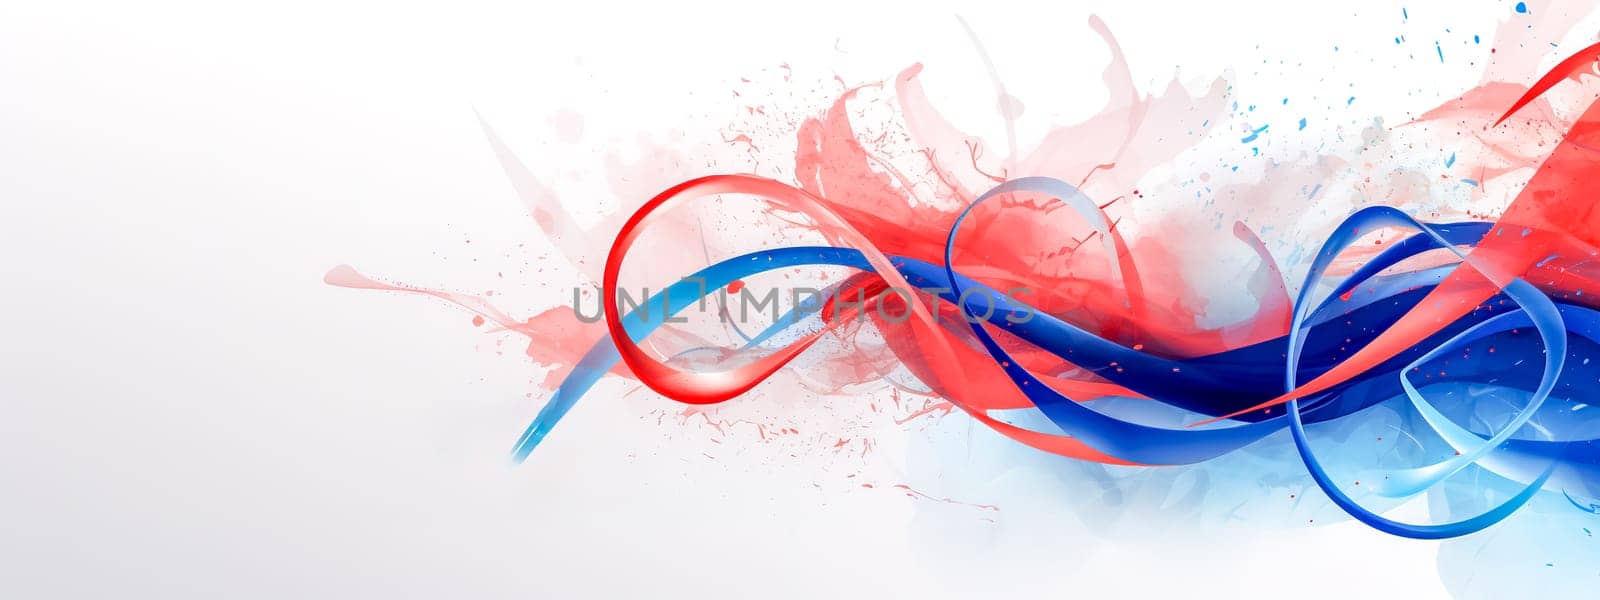 concept for the Olympic Games, with flowing ribbons in blue and red, possibly symbolizing the colors of the French flag, against a white backdrop with splashes of paint by Edophoto